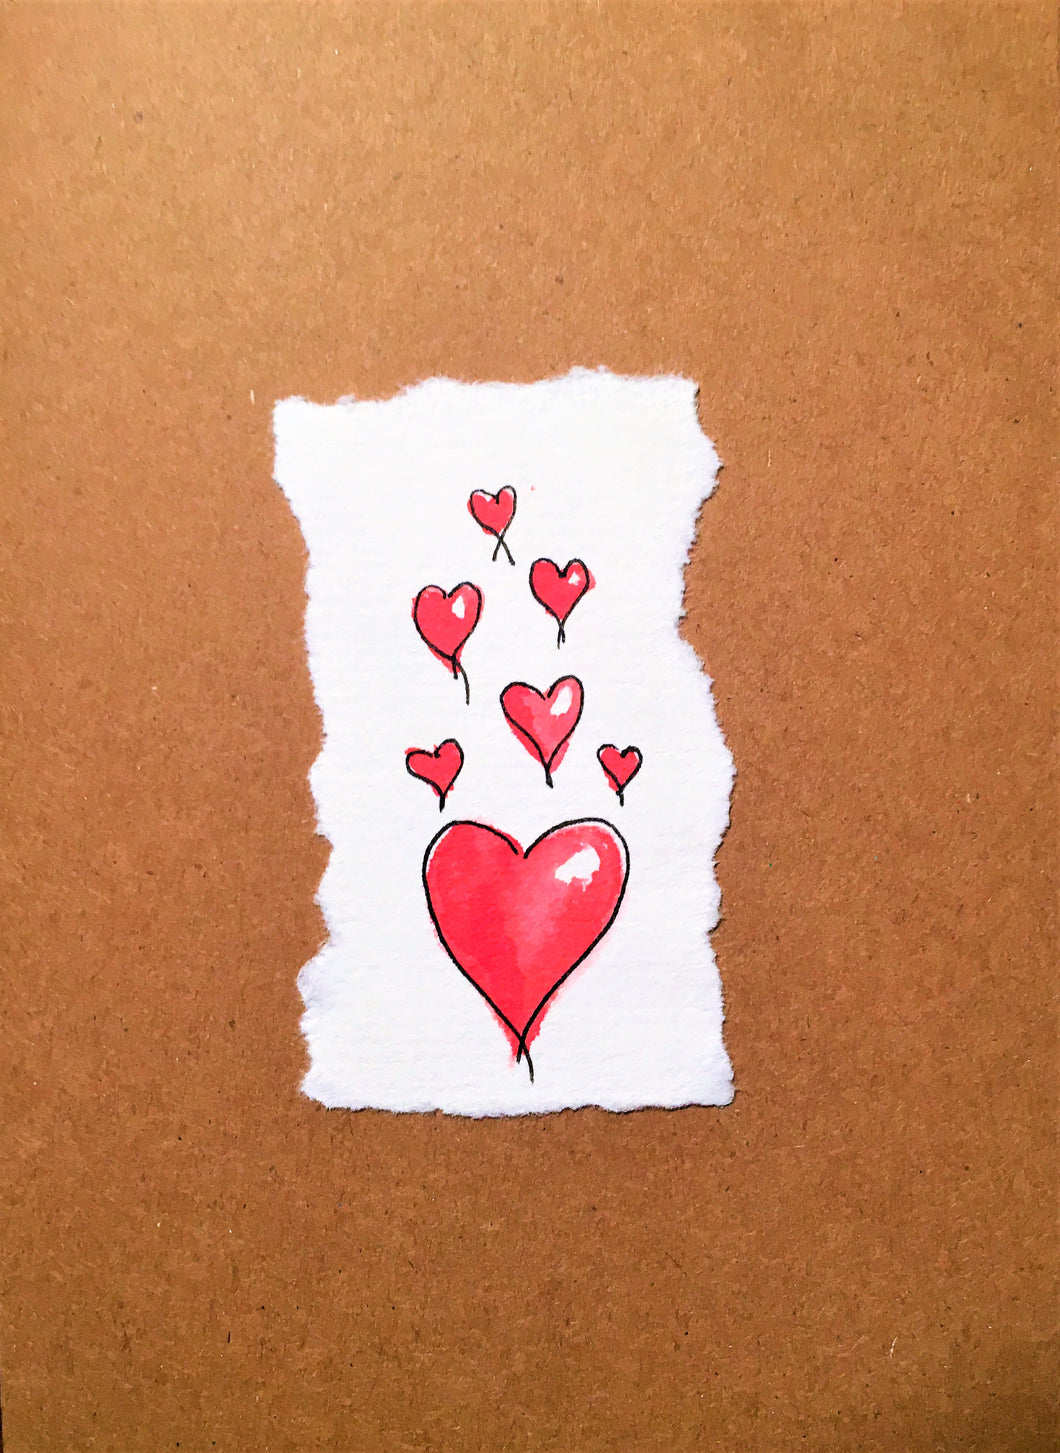 Valentines Card Floating Hearts in the middle - Handmade - eDgE dEsiGn London